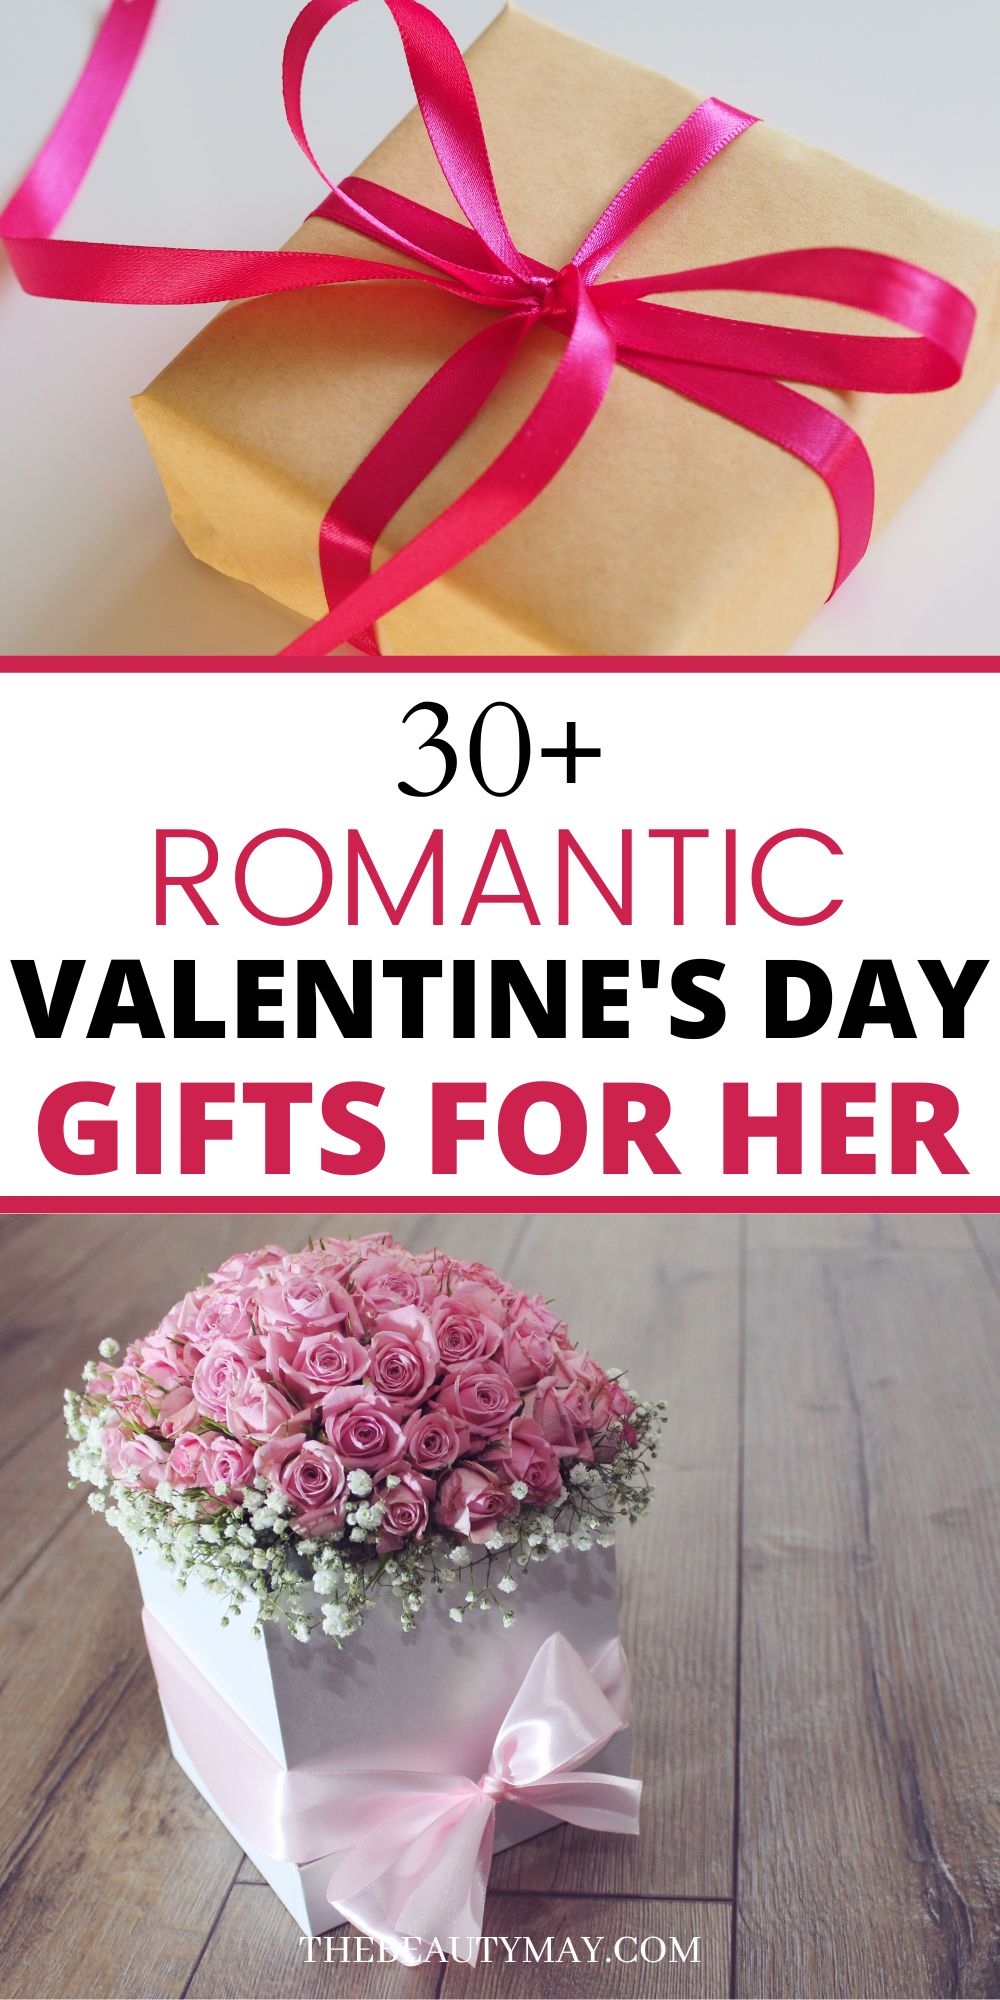 Creating an Impression on Your Crush This Valentine's Day with These 15 Gifts  ideas - Winni - Celebrate Relations